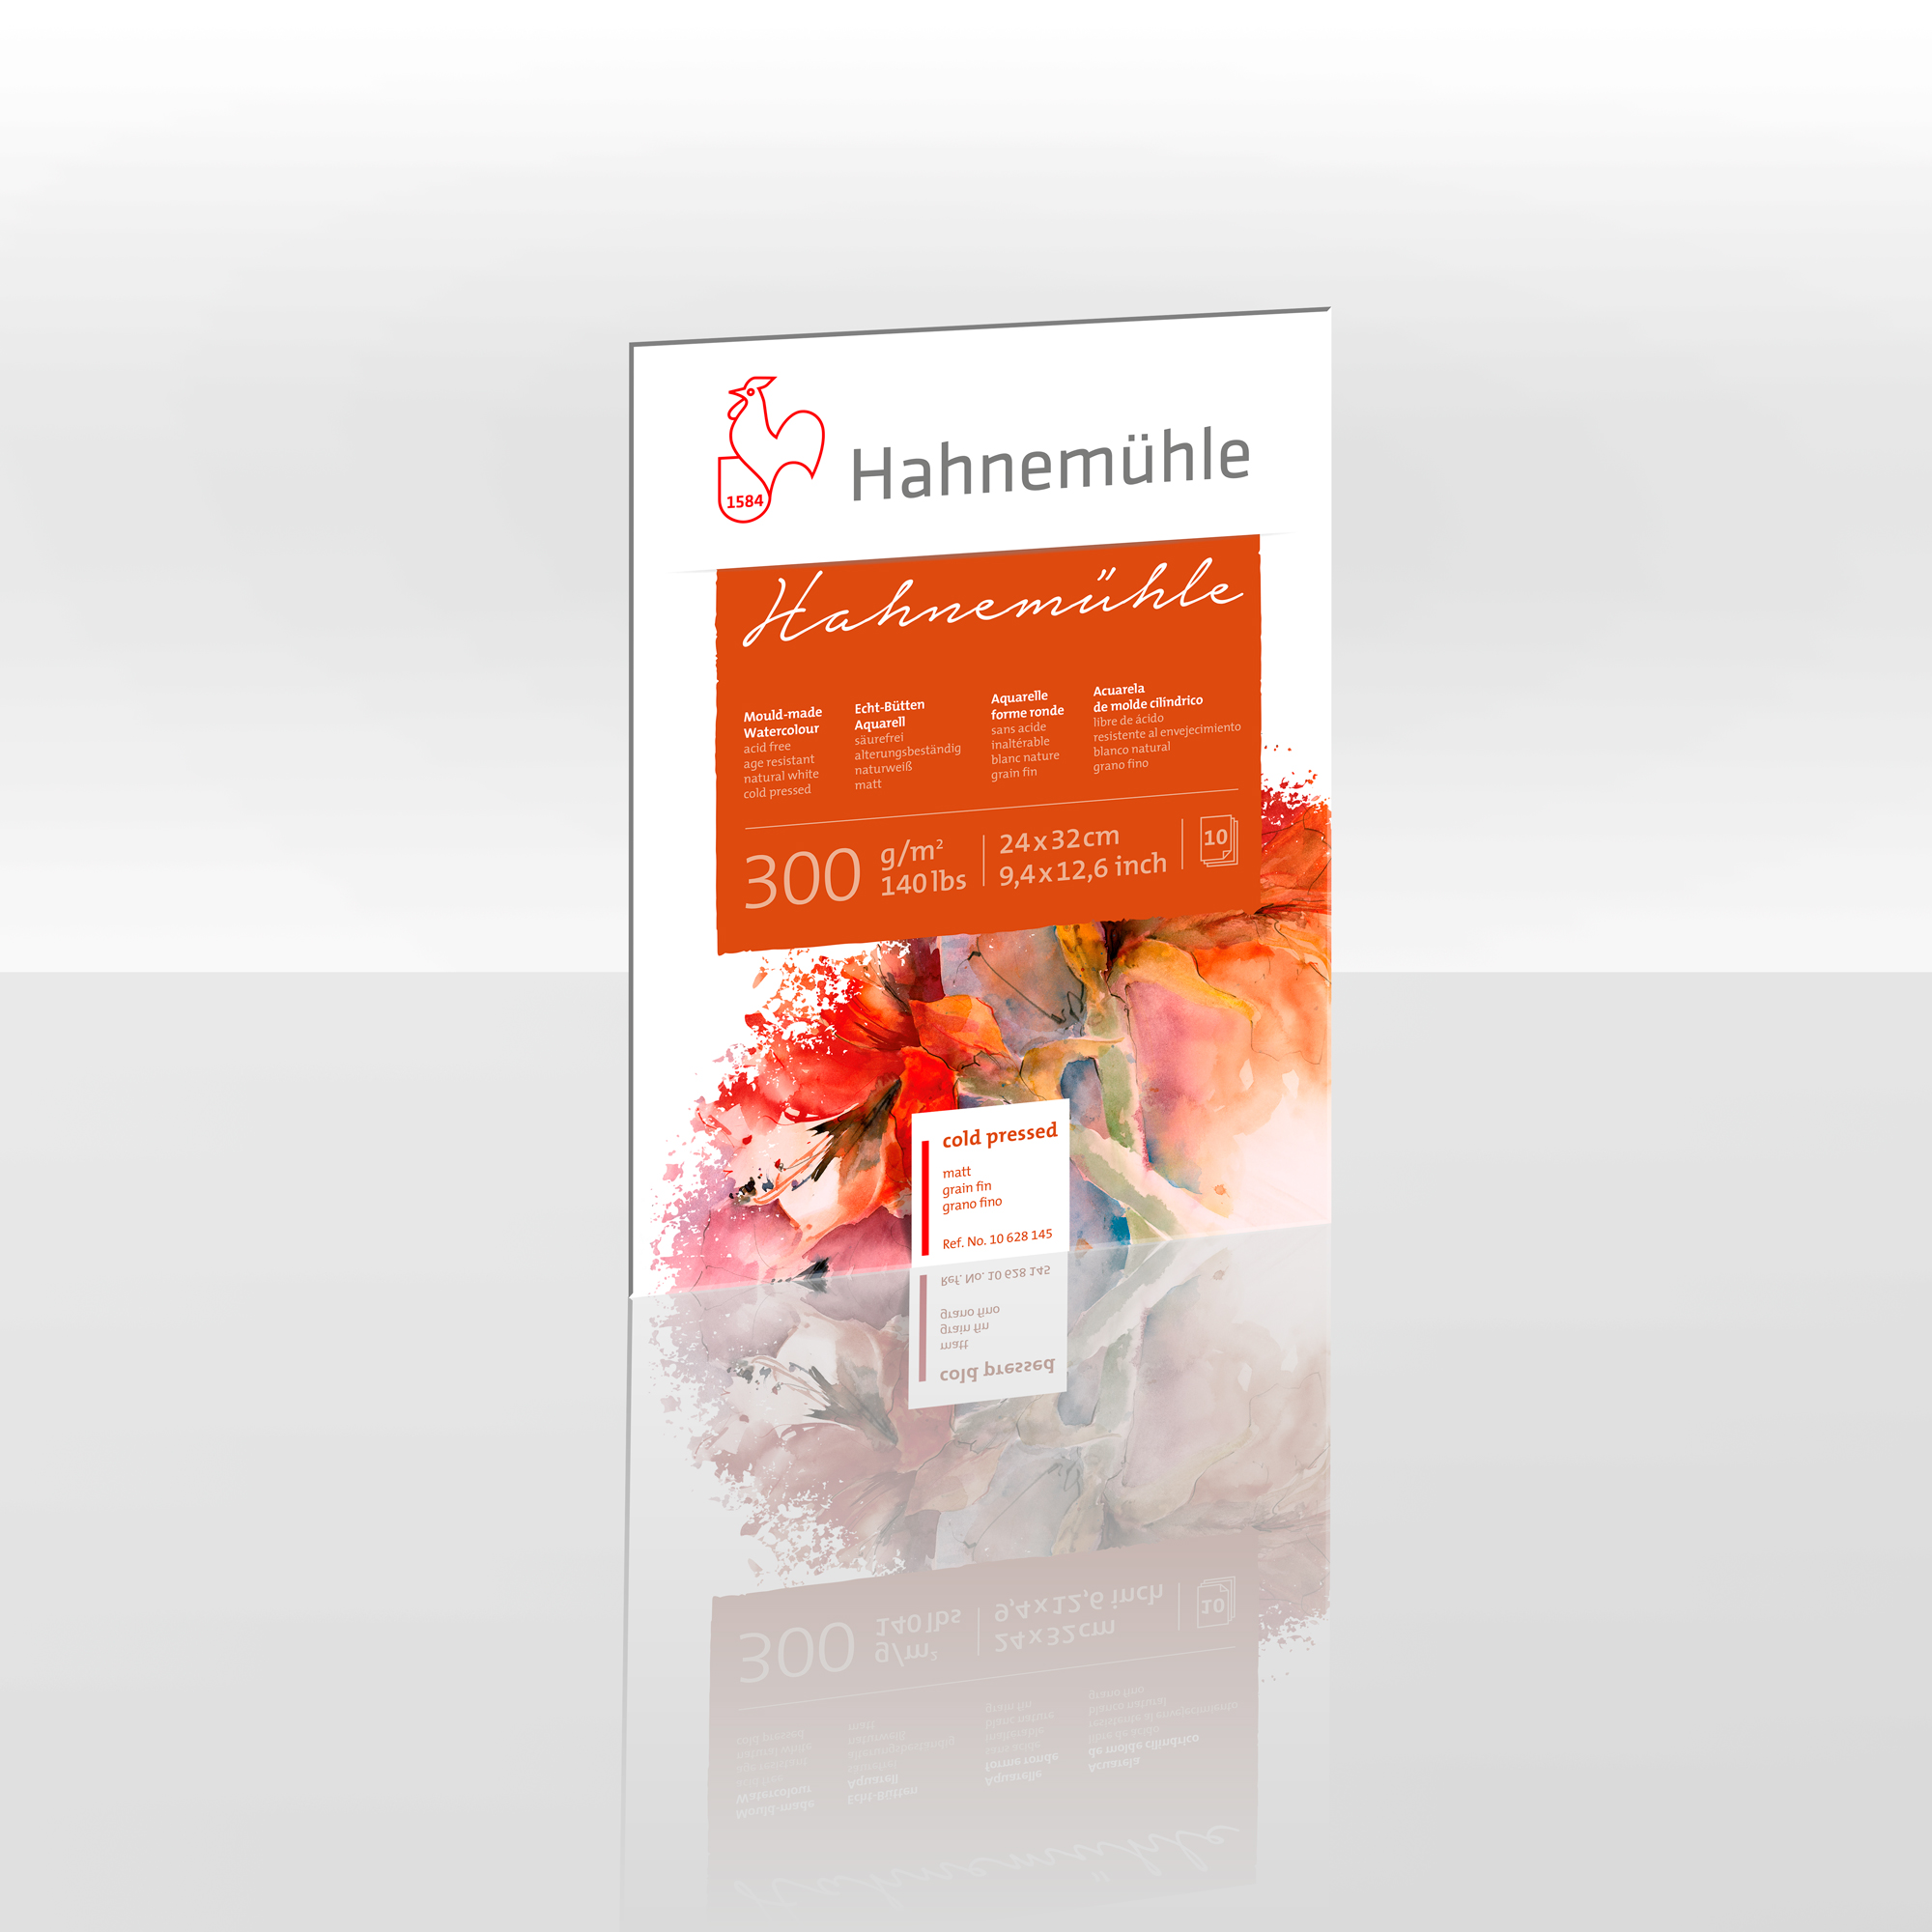 Hahnemühle 300, 24 x 32 cm, 10 sheets, 300, natural white, cold  pressed